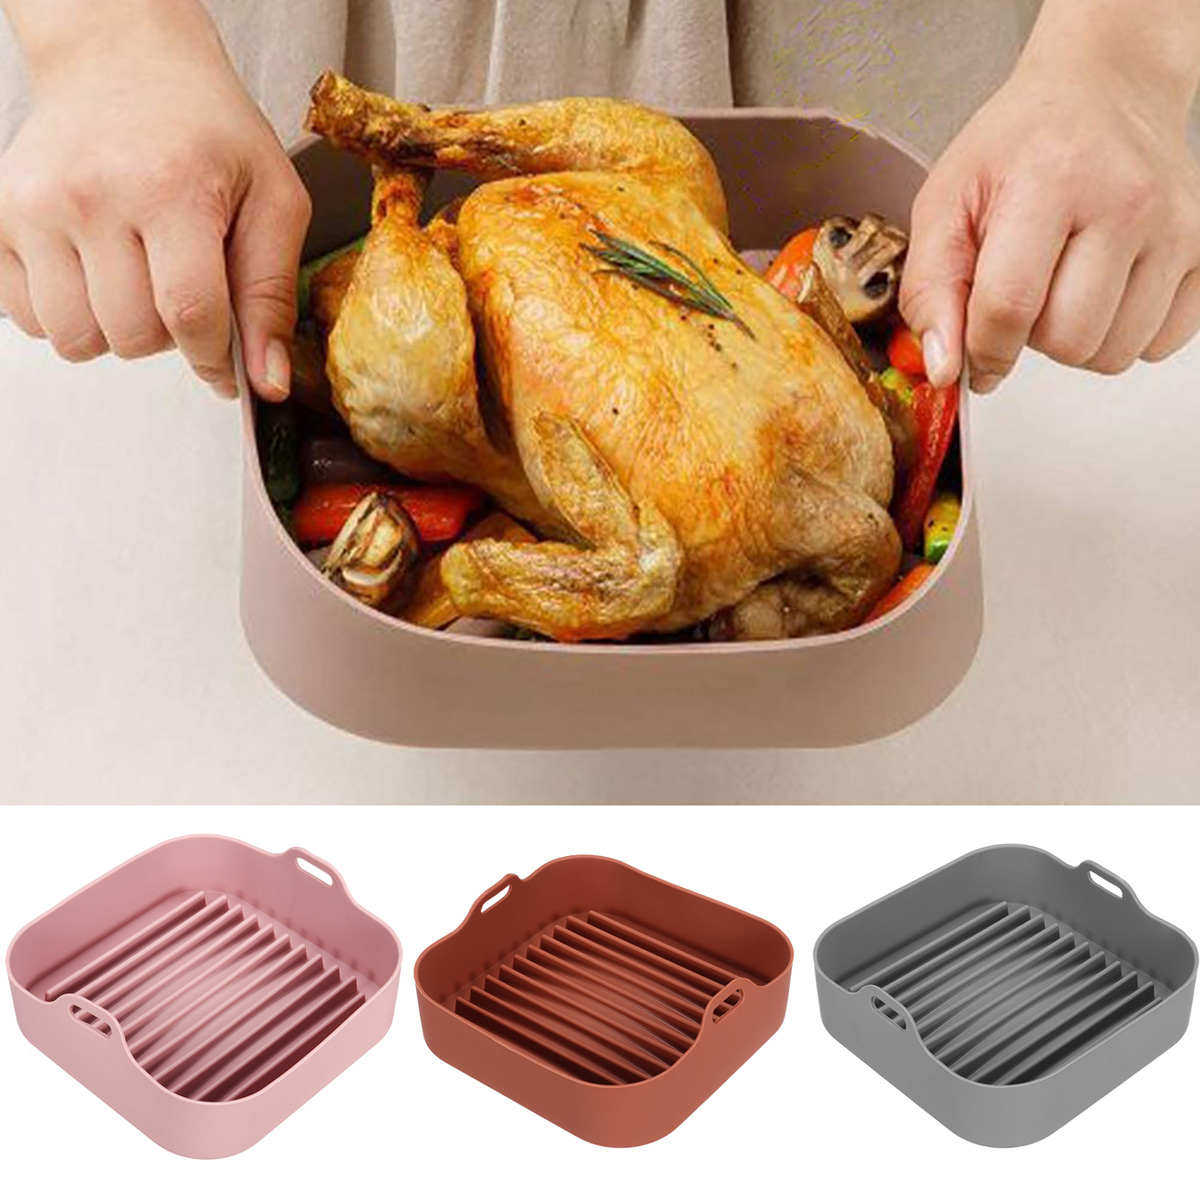 Multifunctional-Silicone-Baking-Tray-High-Temperature-Resistant-Non-stick-Bread-Fried-Baking-Pan-wit-1864776-5